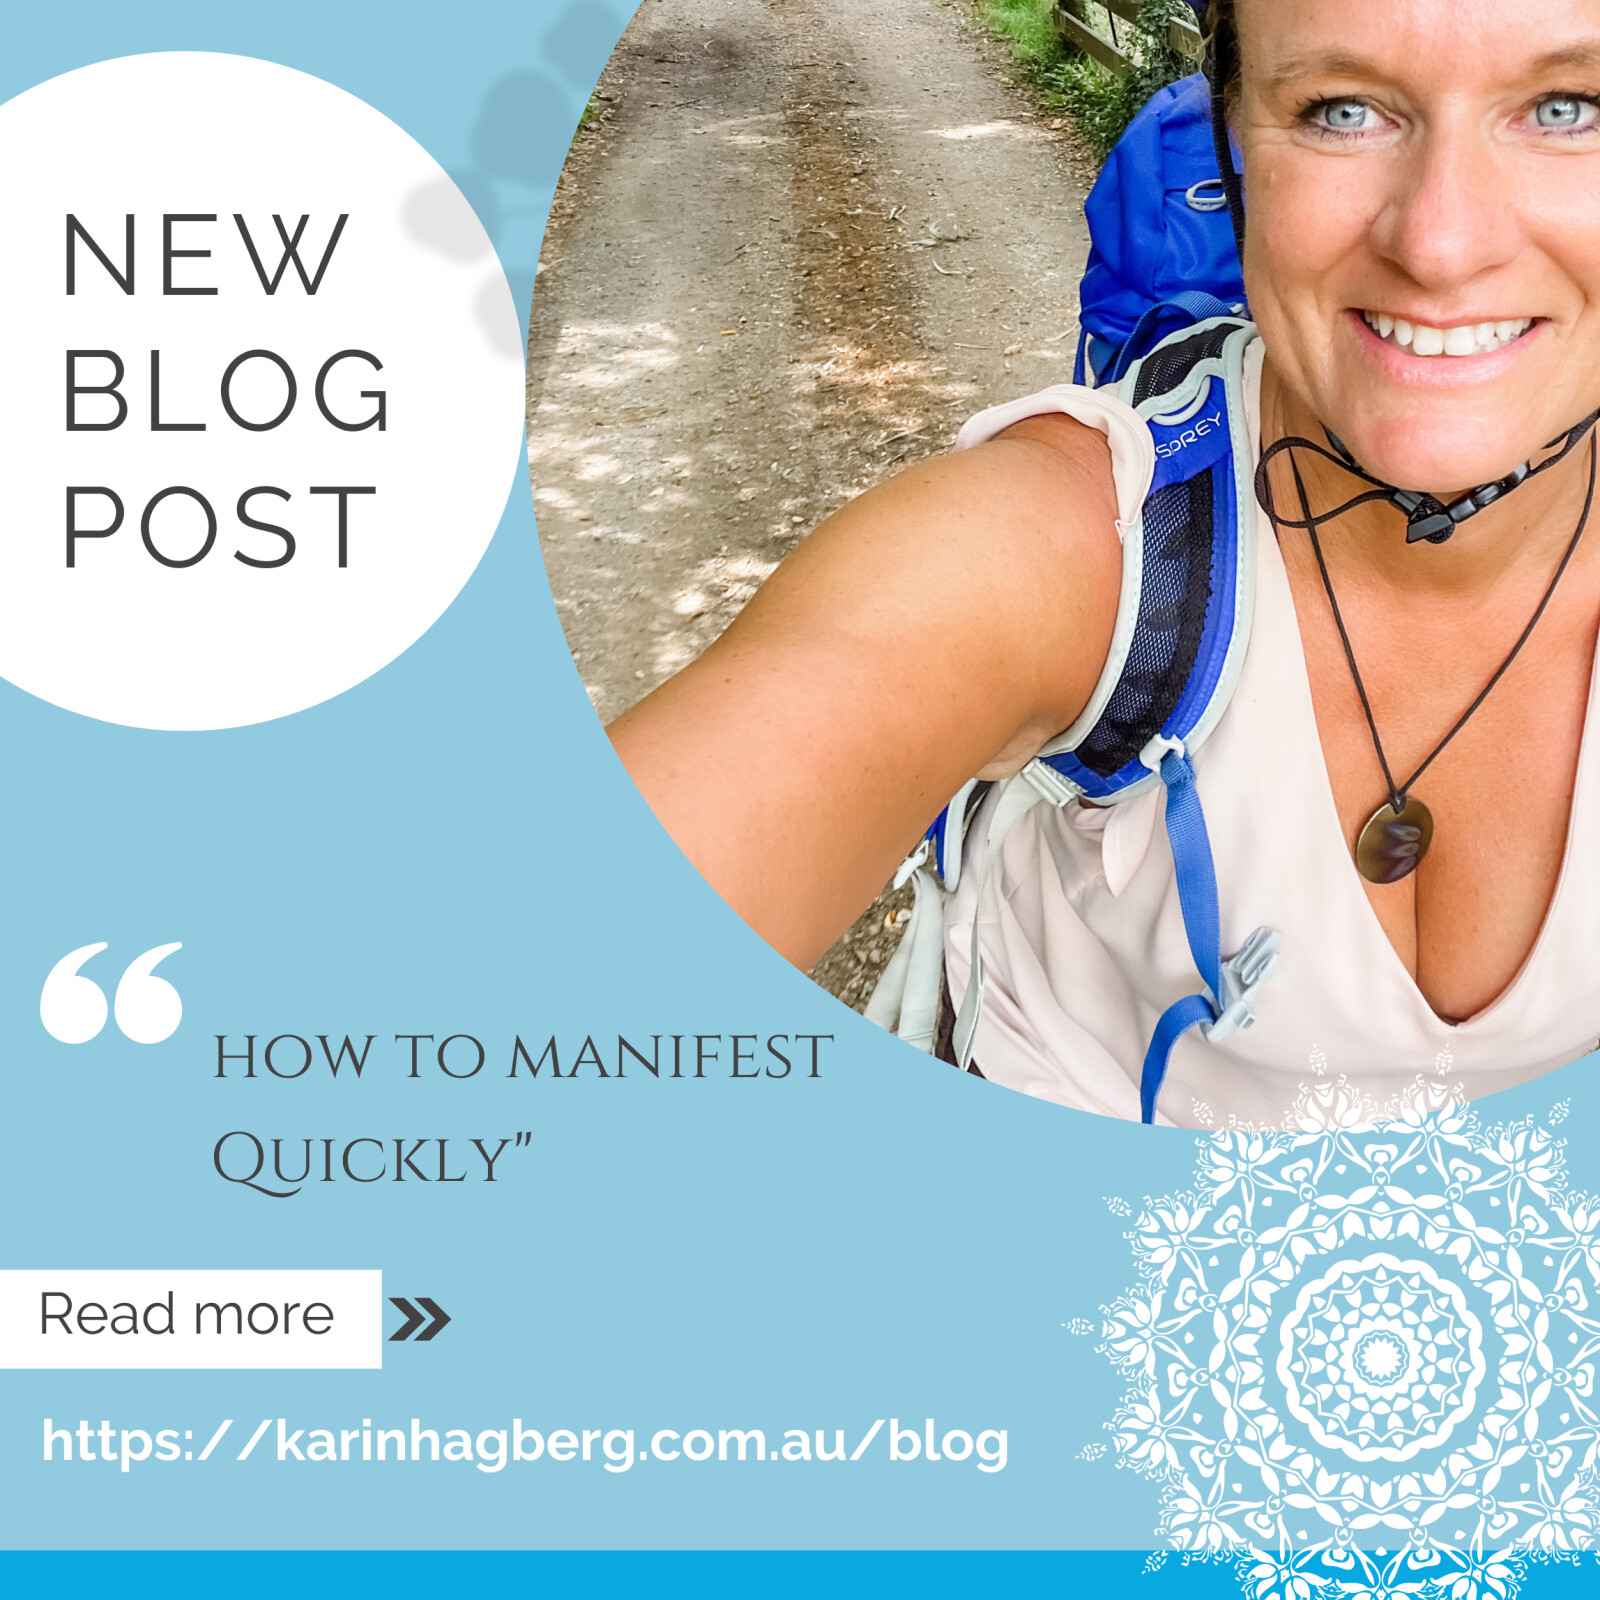 Tips on how to manifest quickly